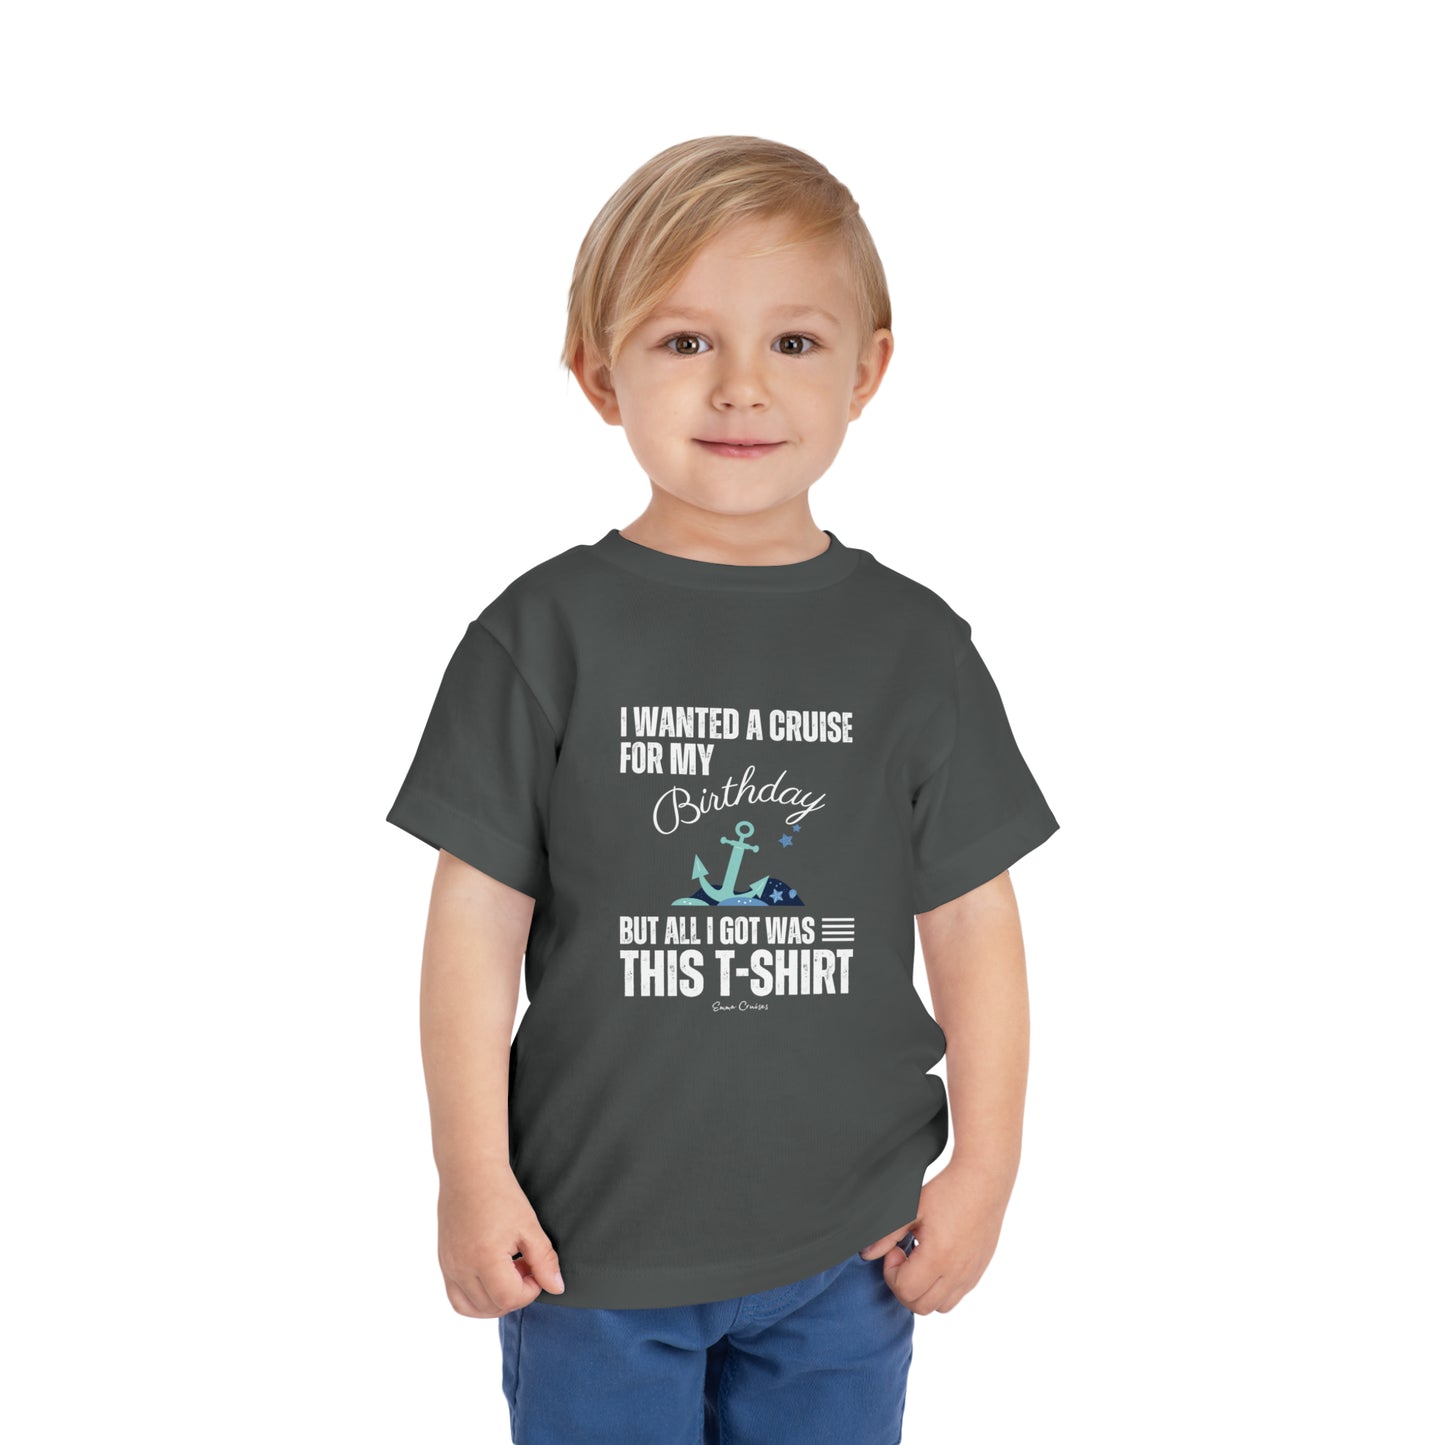 I Wanted a Cruise for my Birthday - Toddler UNISEX T-Shirt